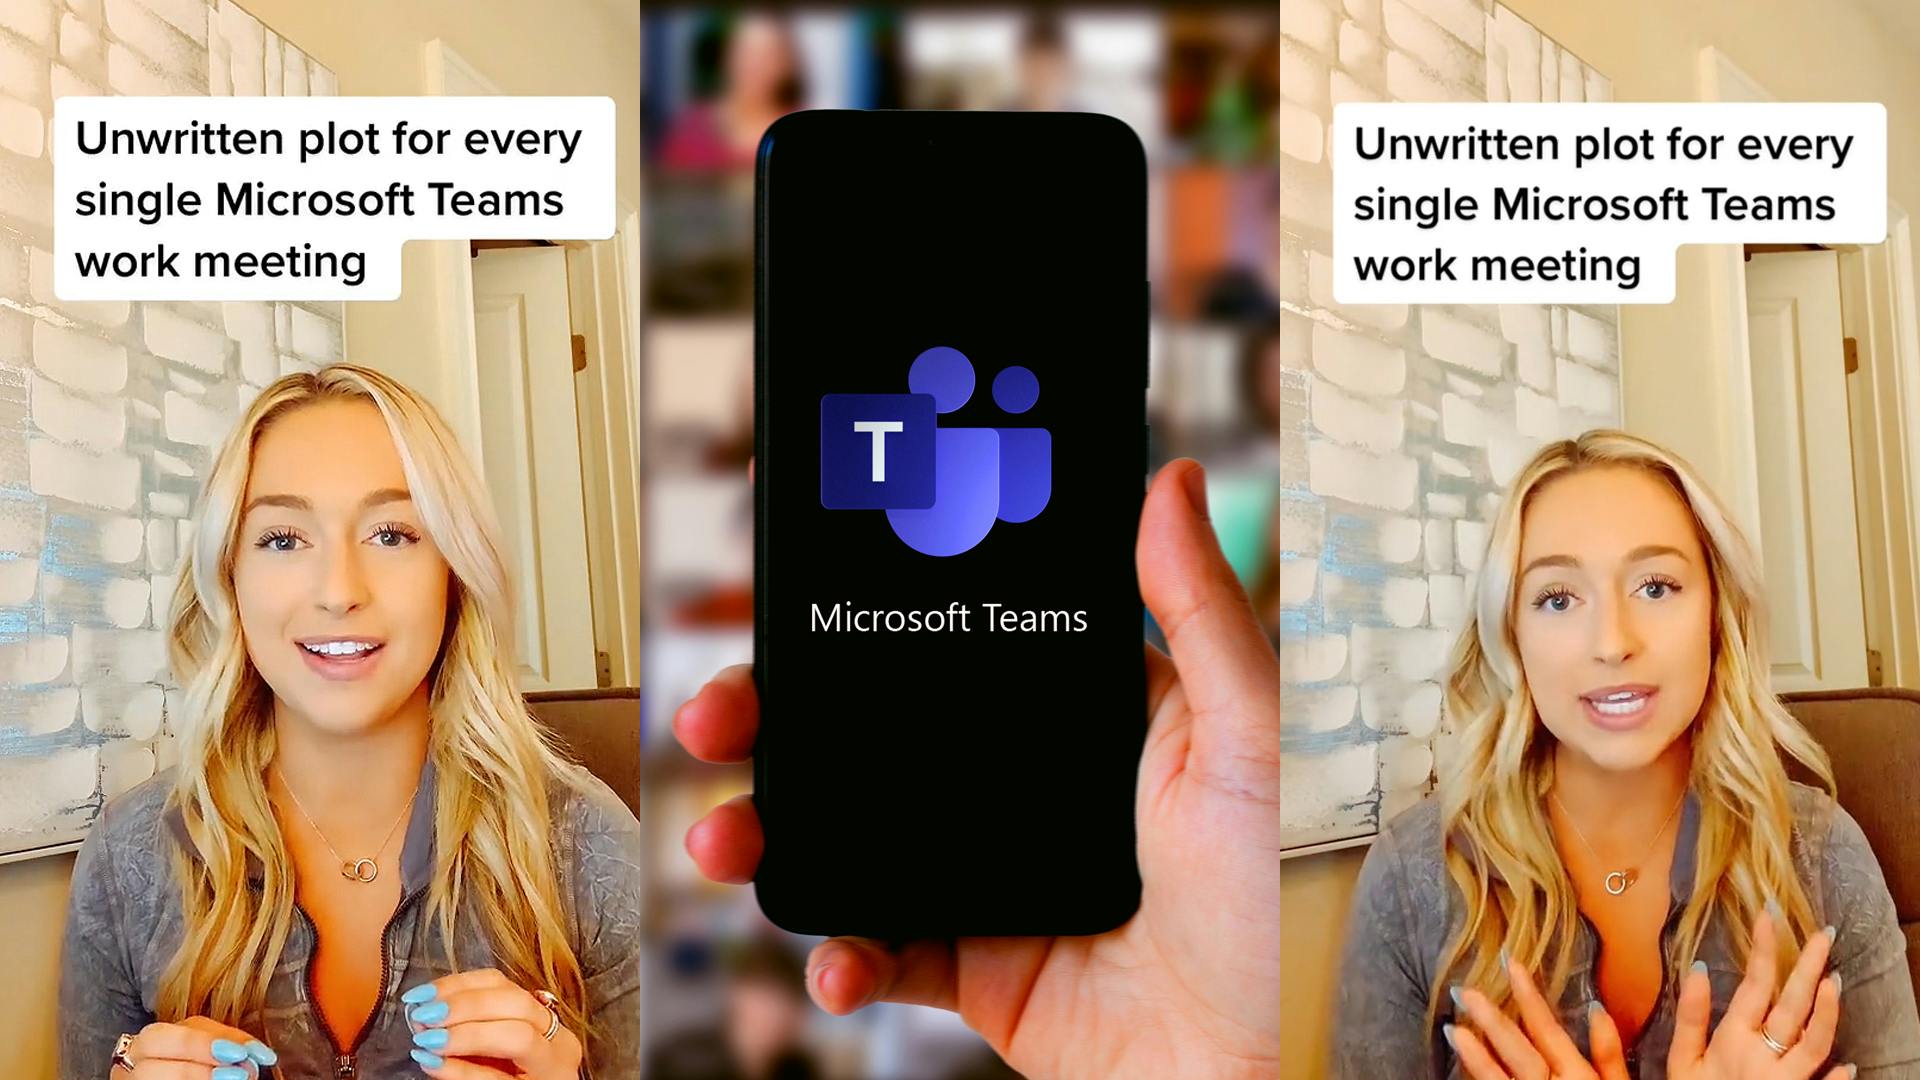 woman speaking in front of tan wall and painting caption "Unwritten plot for every single Microsoft Teams work meeting" (l) hand holding Microsoft Teams open on smart phone in front of meeting (c) woman speaking in front of tan wall and painting caption "Unwritten plot for every single Microsoft Teams work meeting" (r)